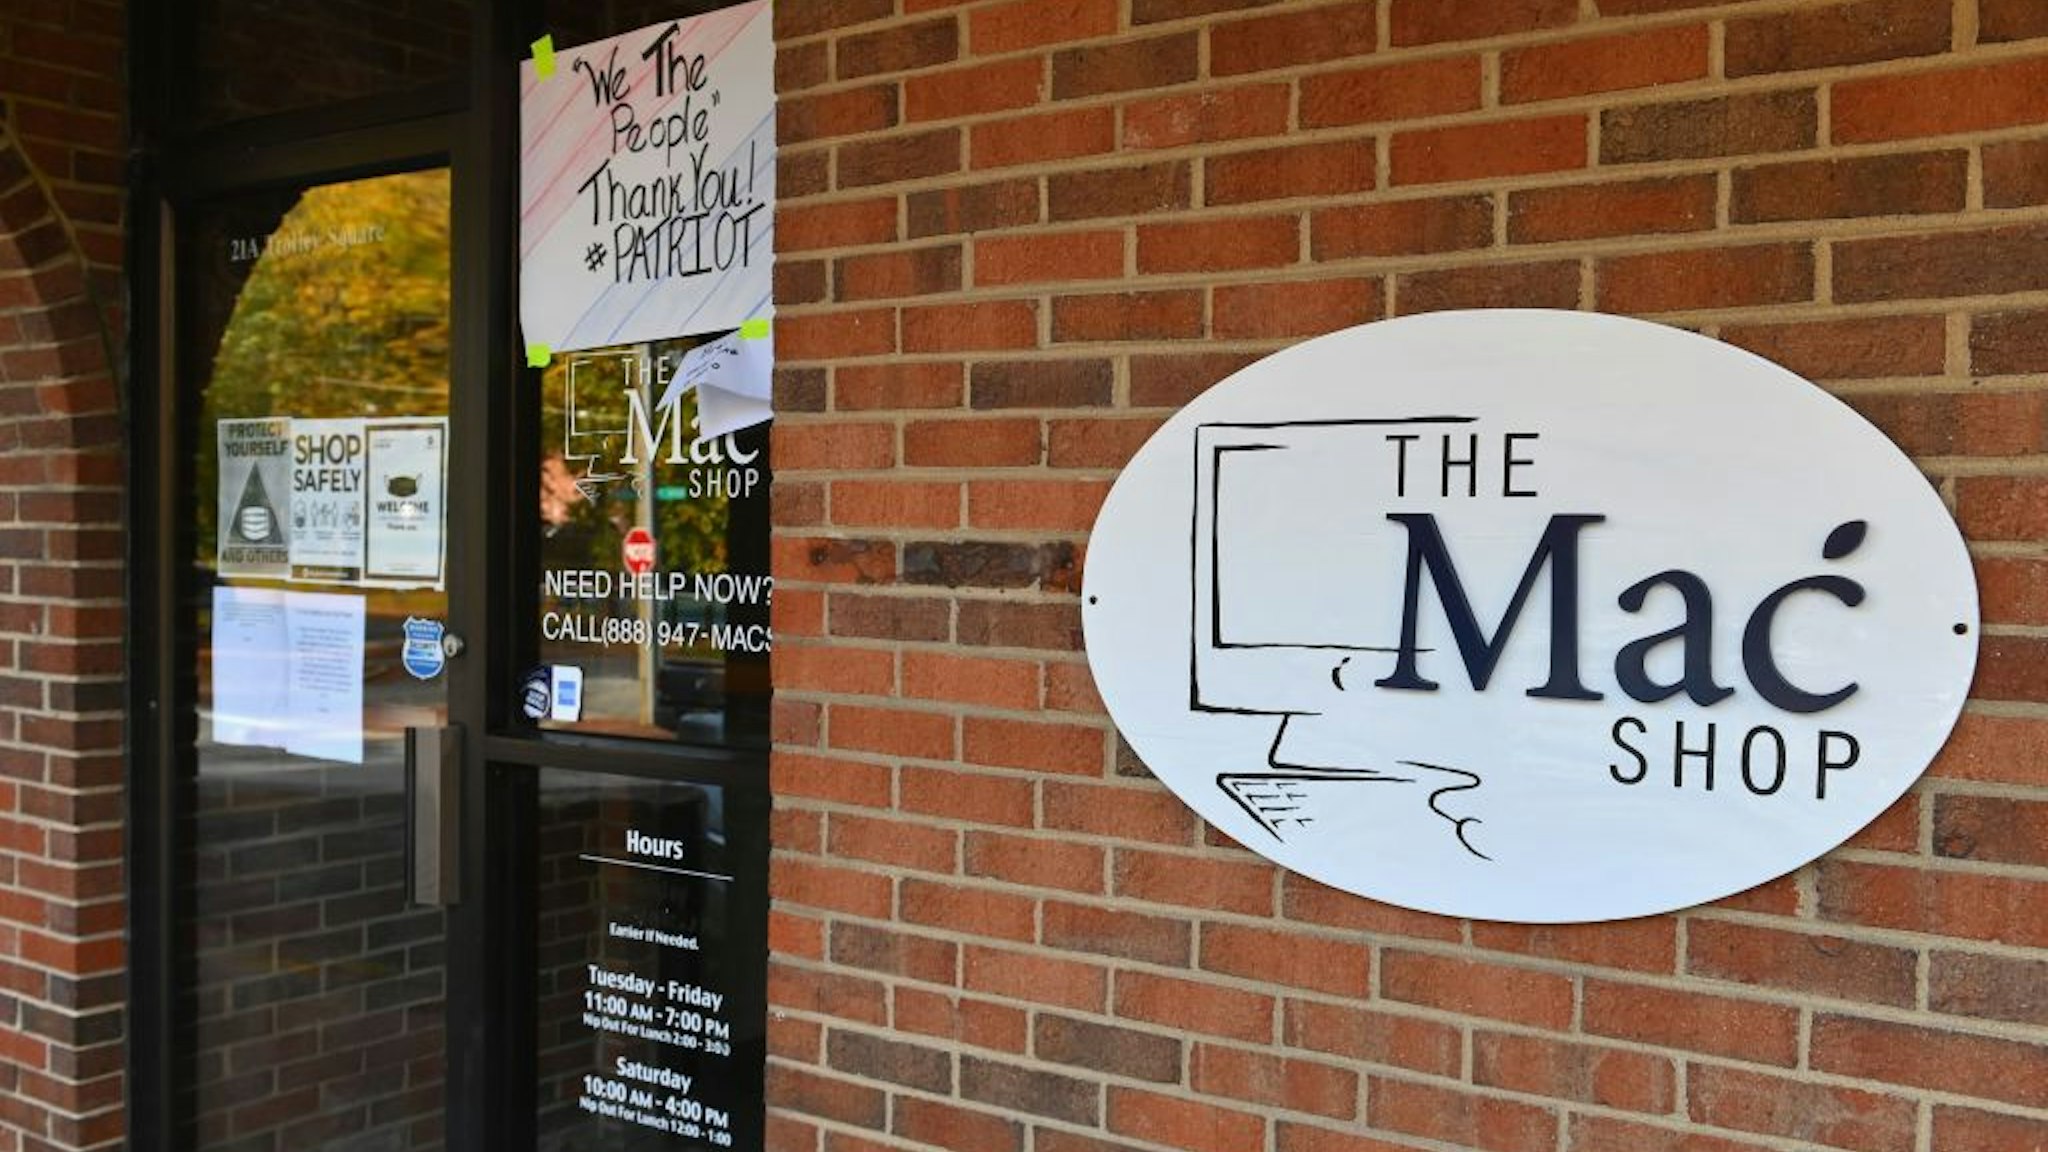 An exterior view of "The Mac Shop" in Wilmington, Delaware is seen on October 21, 2020. - The New York Post last week revived allegations against Hunter Biden with a story claiming it had obtained documents from a laptop owned by the former vice president's son which was brought in for repairs to the shop in April 2019 but never picked up. The Post claimed that emails found on the laptop showed that Hunter Biden introduced his father to a Burisma advisor, Vadym Pozharskyi, in 2015 and contradict Joe Biden's claims that he never spoke to his son about his overseas business dealings.